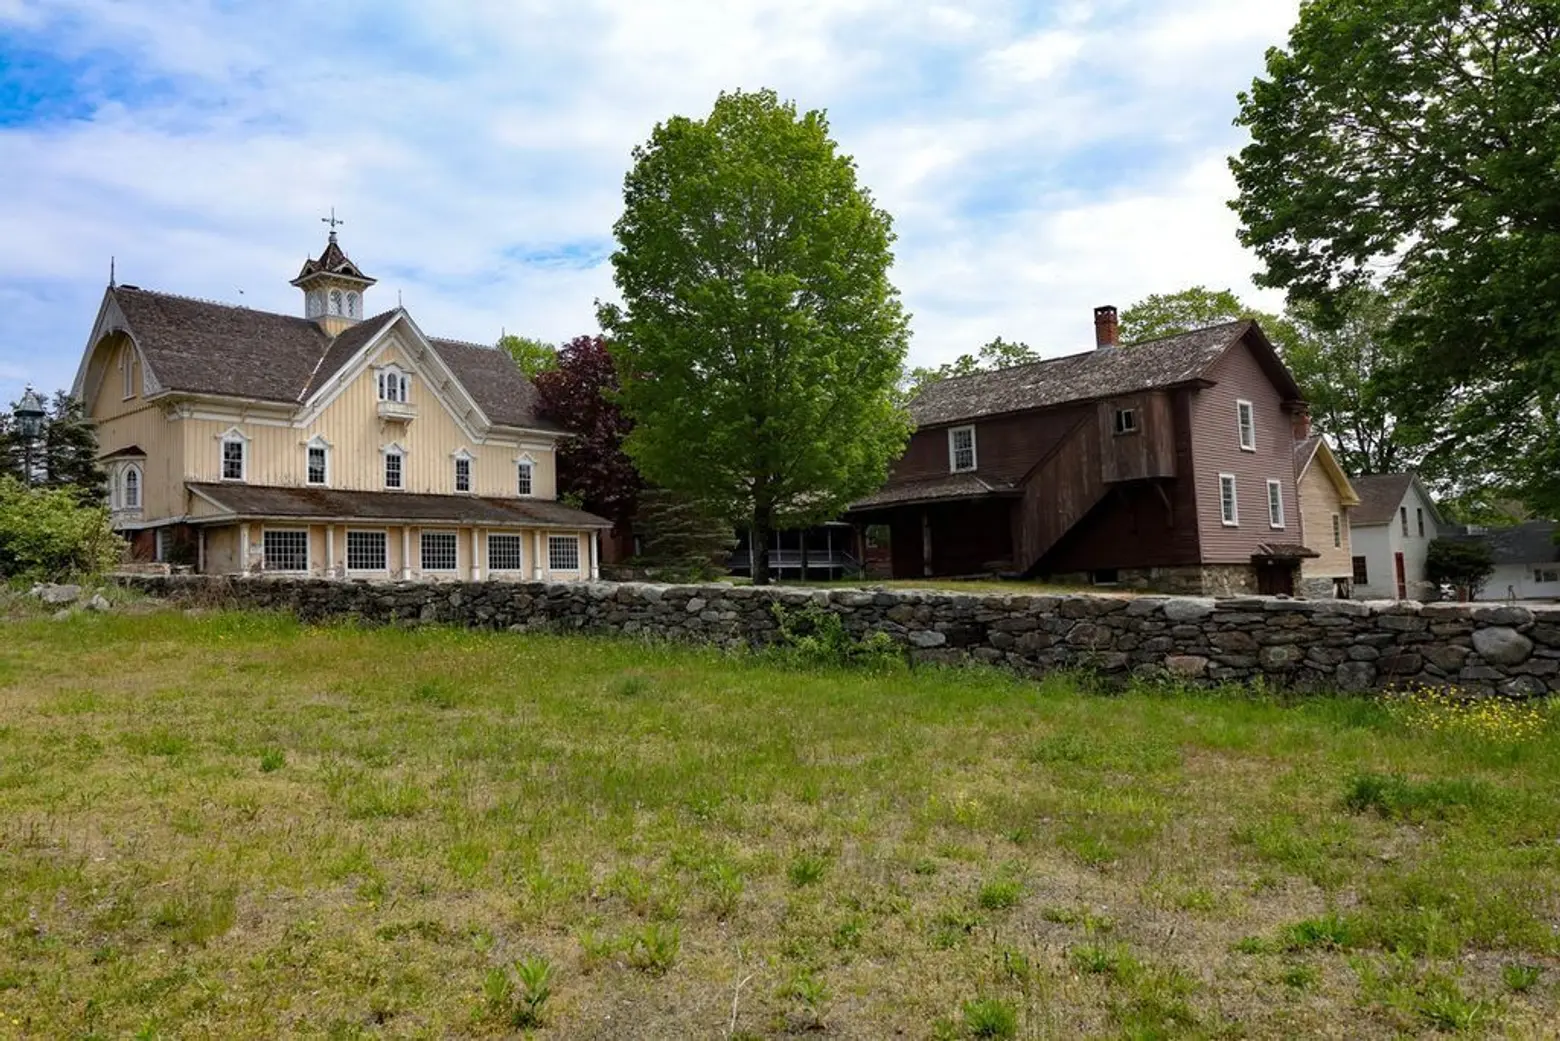 Buy this entire 62-acre ghost town in Connecticut for just $1.9M